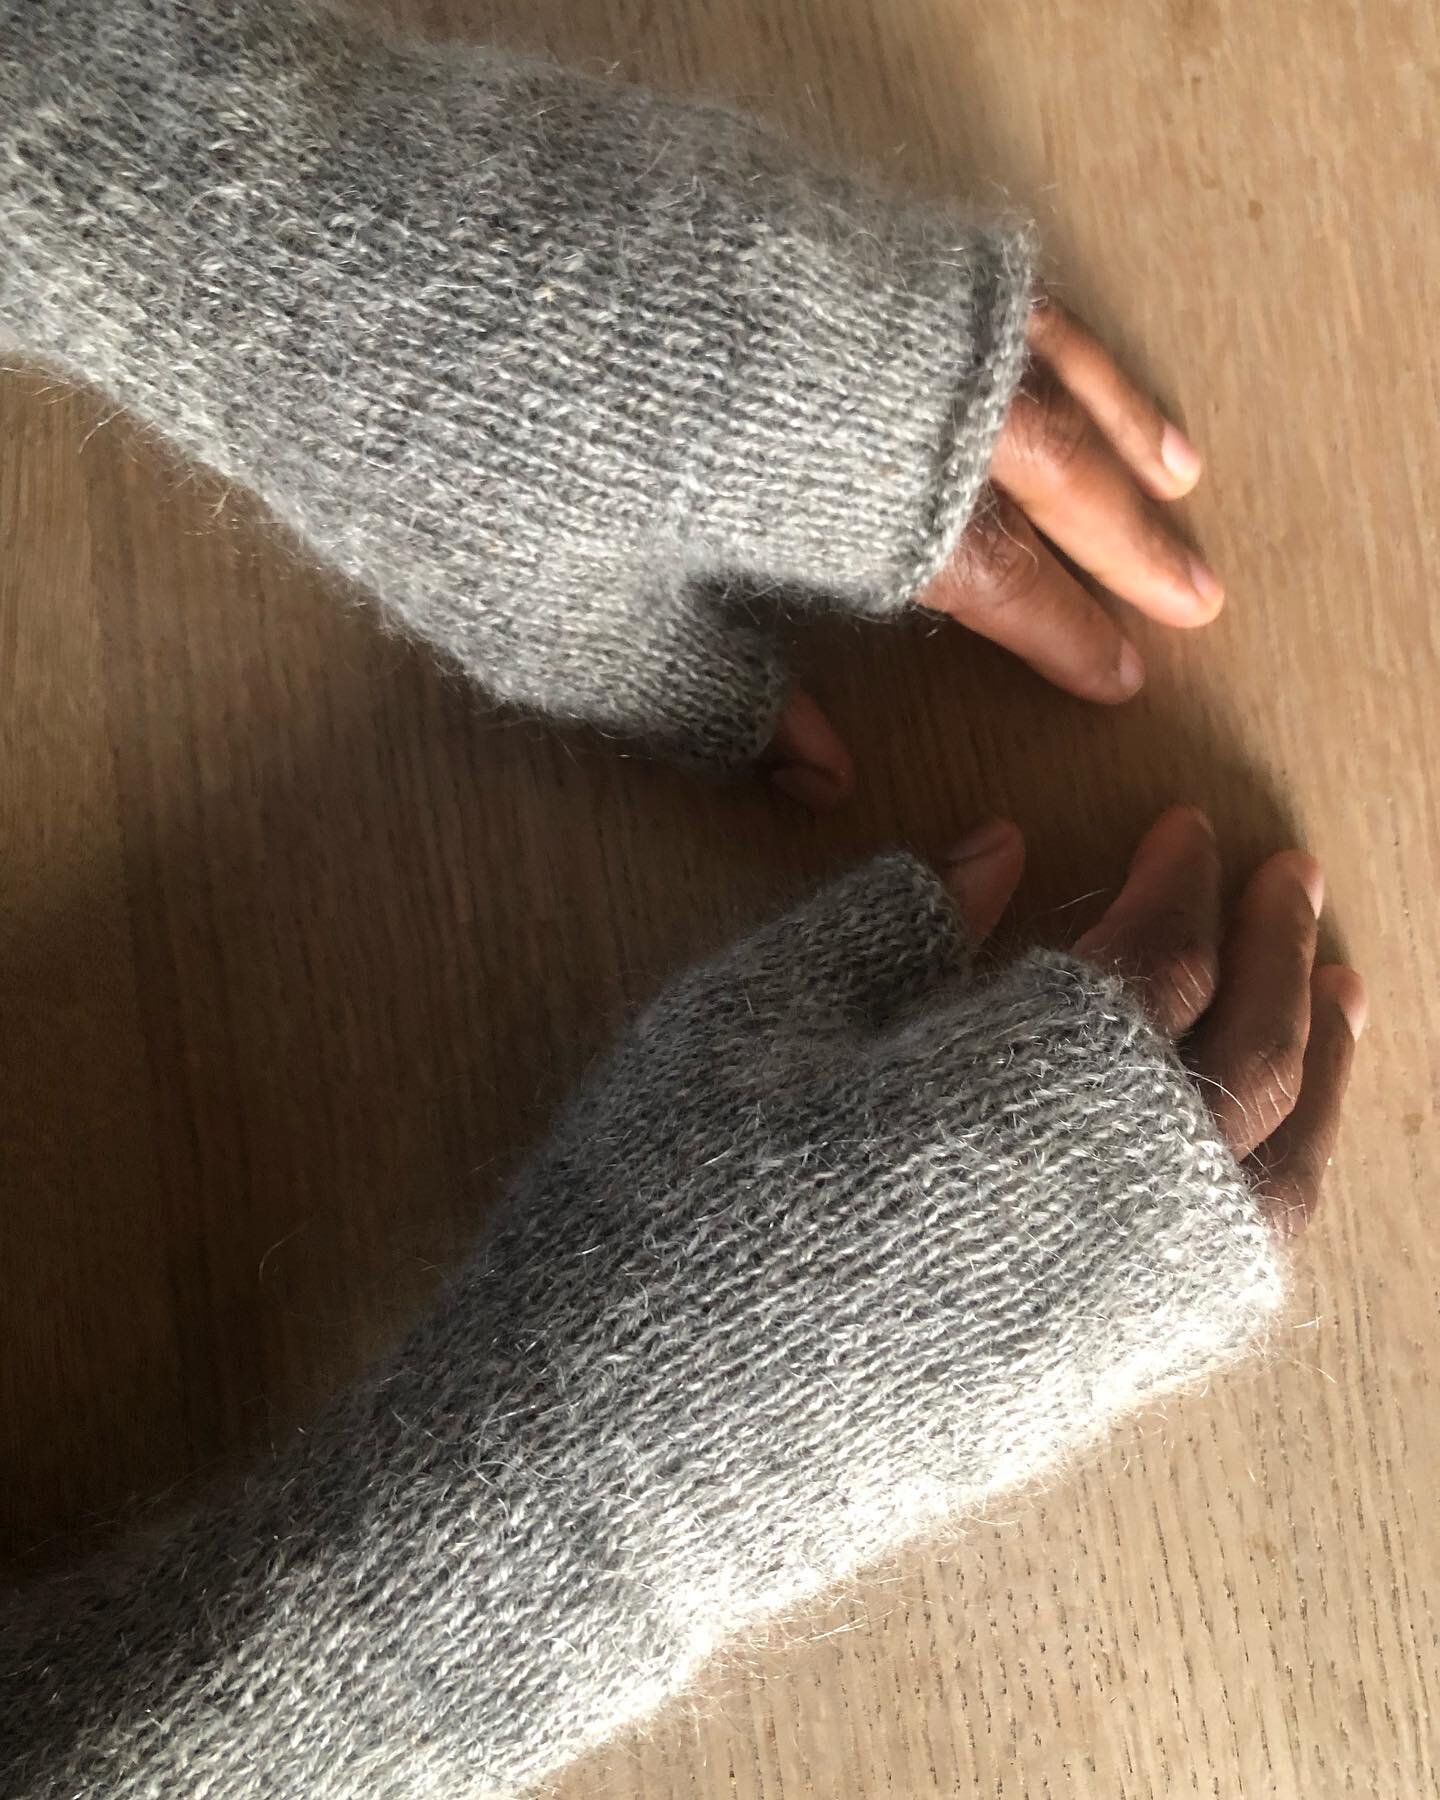 Absolutely perfect hand knitted mitts from our very own mohair&hellip;. With thanks to the talents of #kathegray.  #lifeonkamesfarm #scottishhighlands  #angoragoats  #knitting #scottishknitwear #argyll